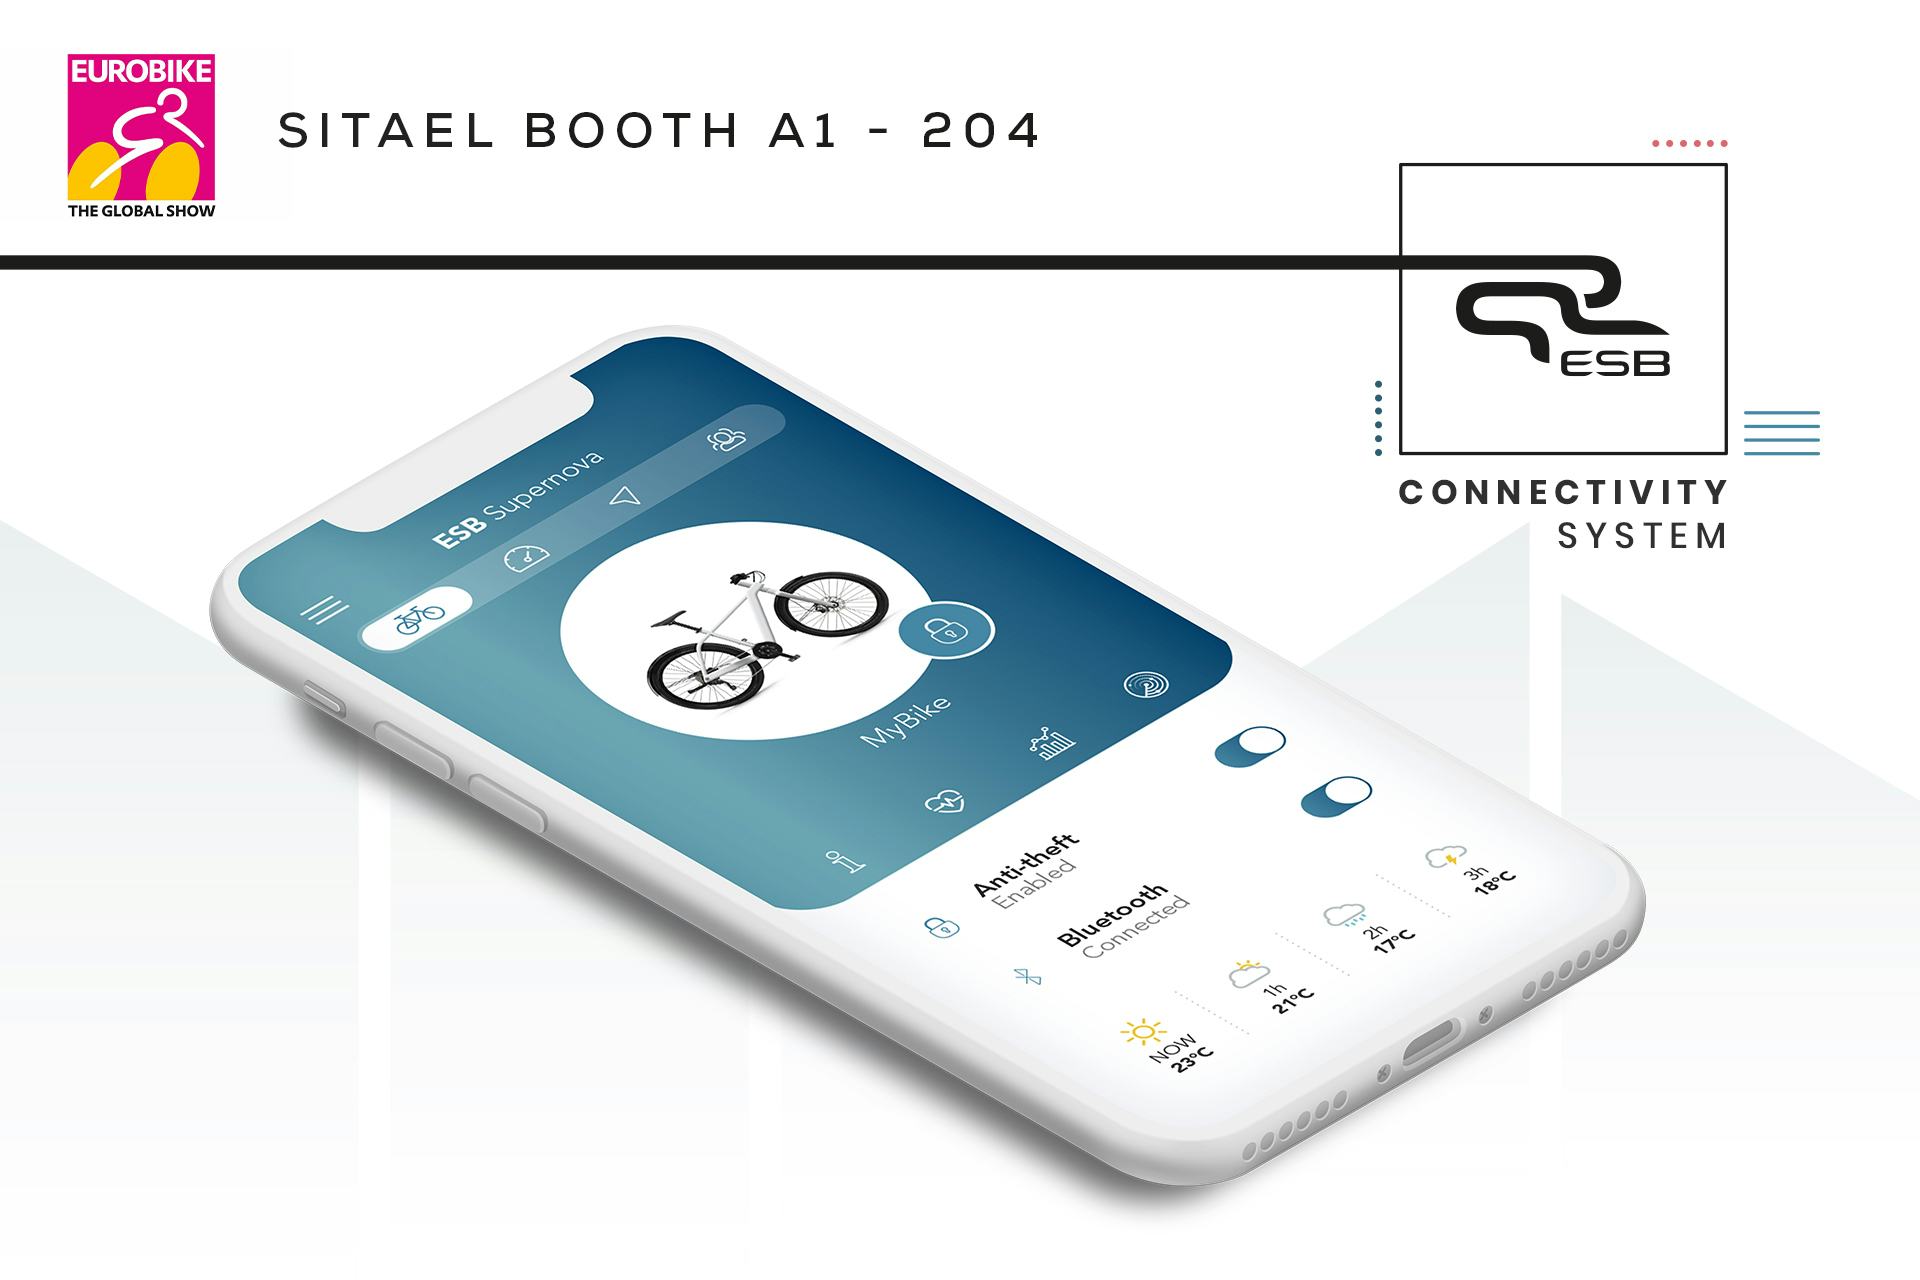 SITAEL upgraded Connectivity presented at Eurobike